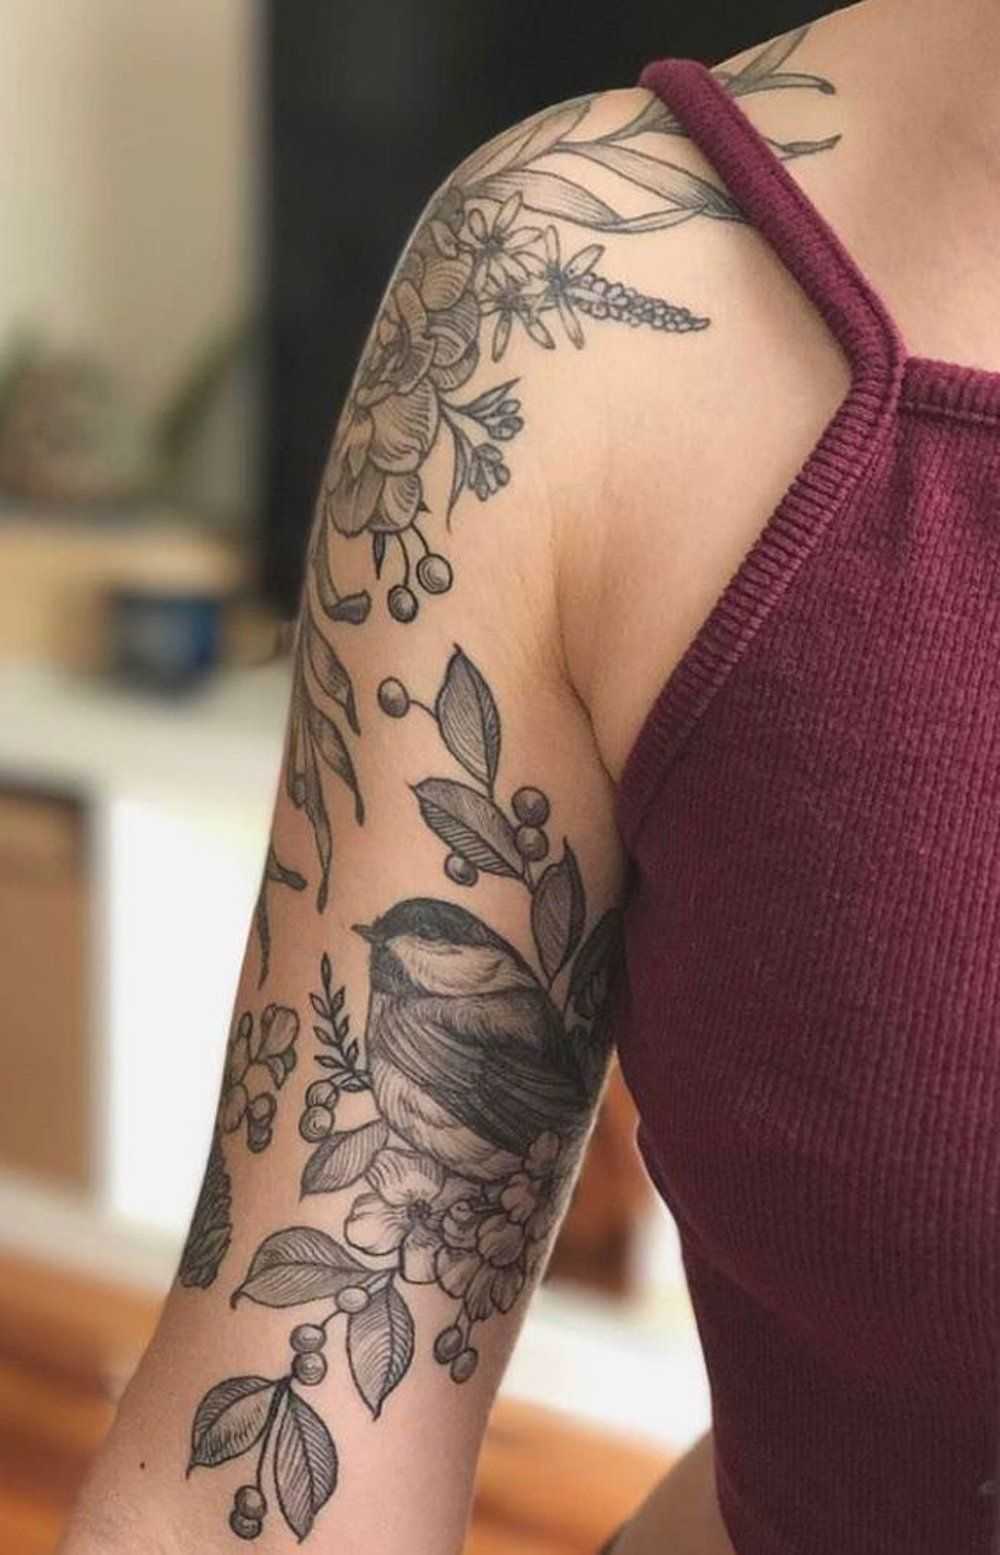 Girly Black Floral Flower Arm Sleeve Tattoo Ideas For Women intended for dimensions 1000 X 1555